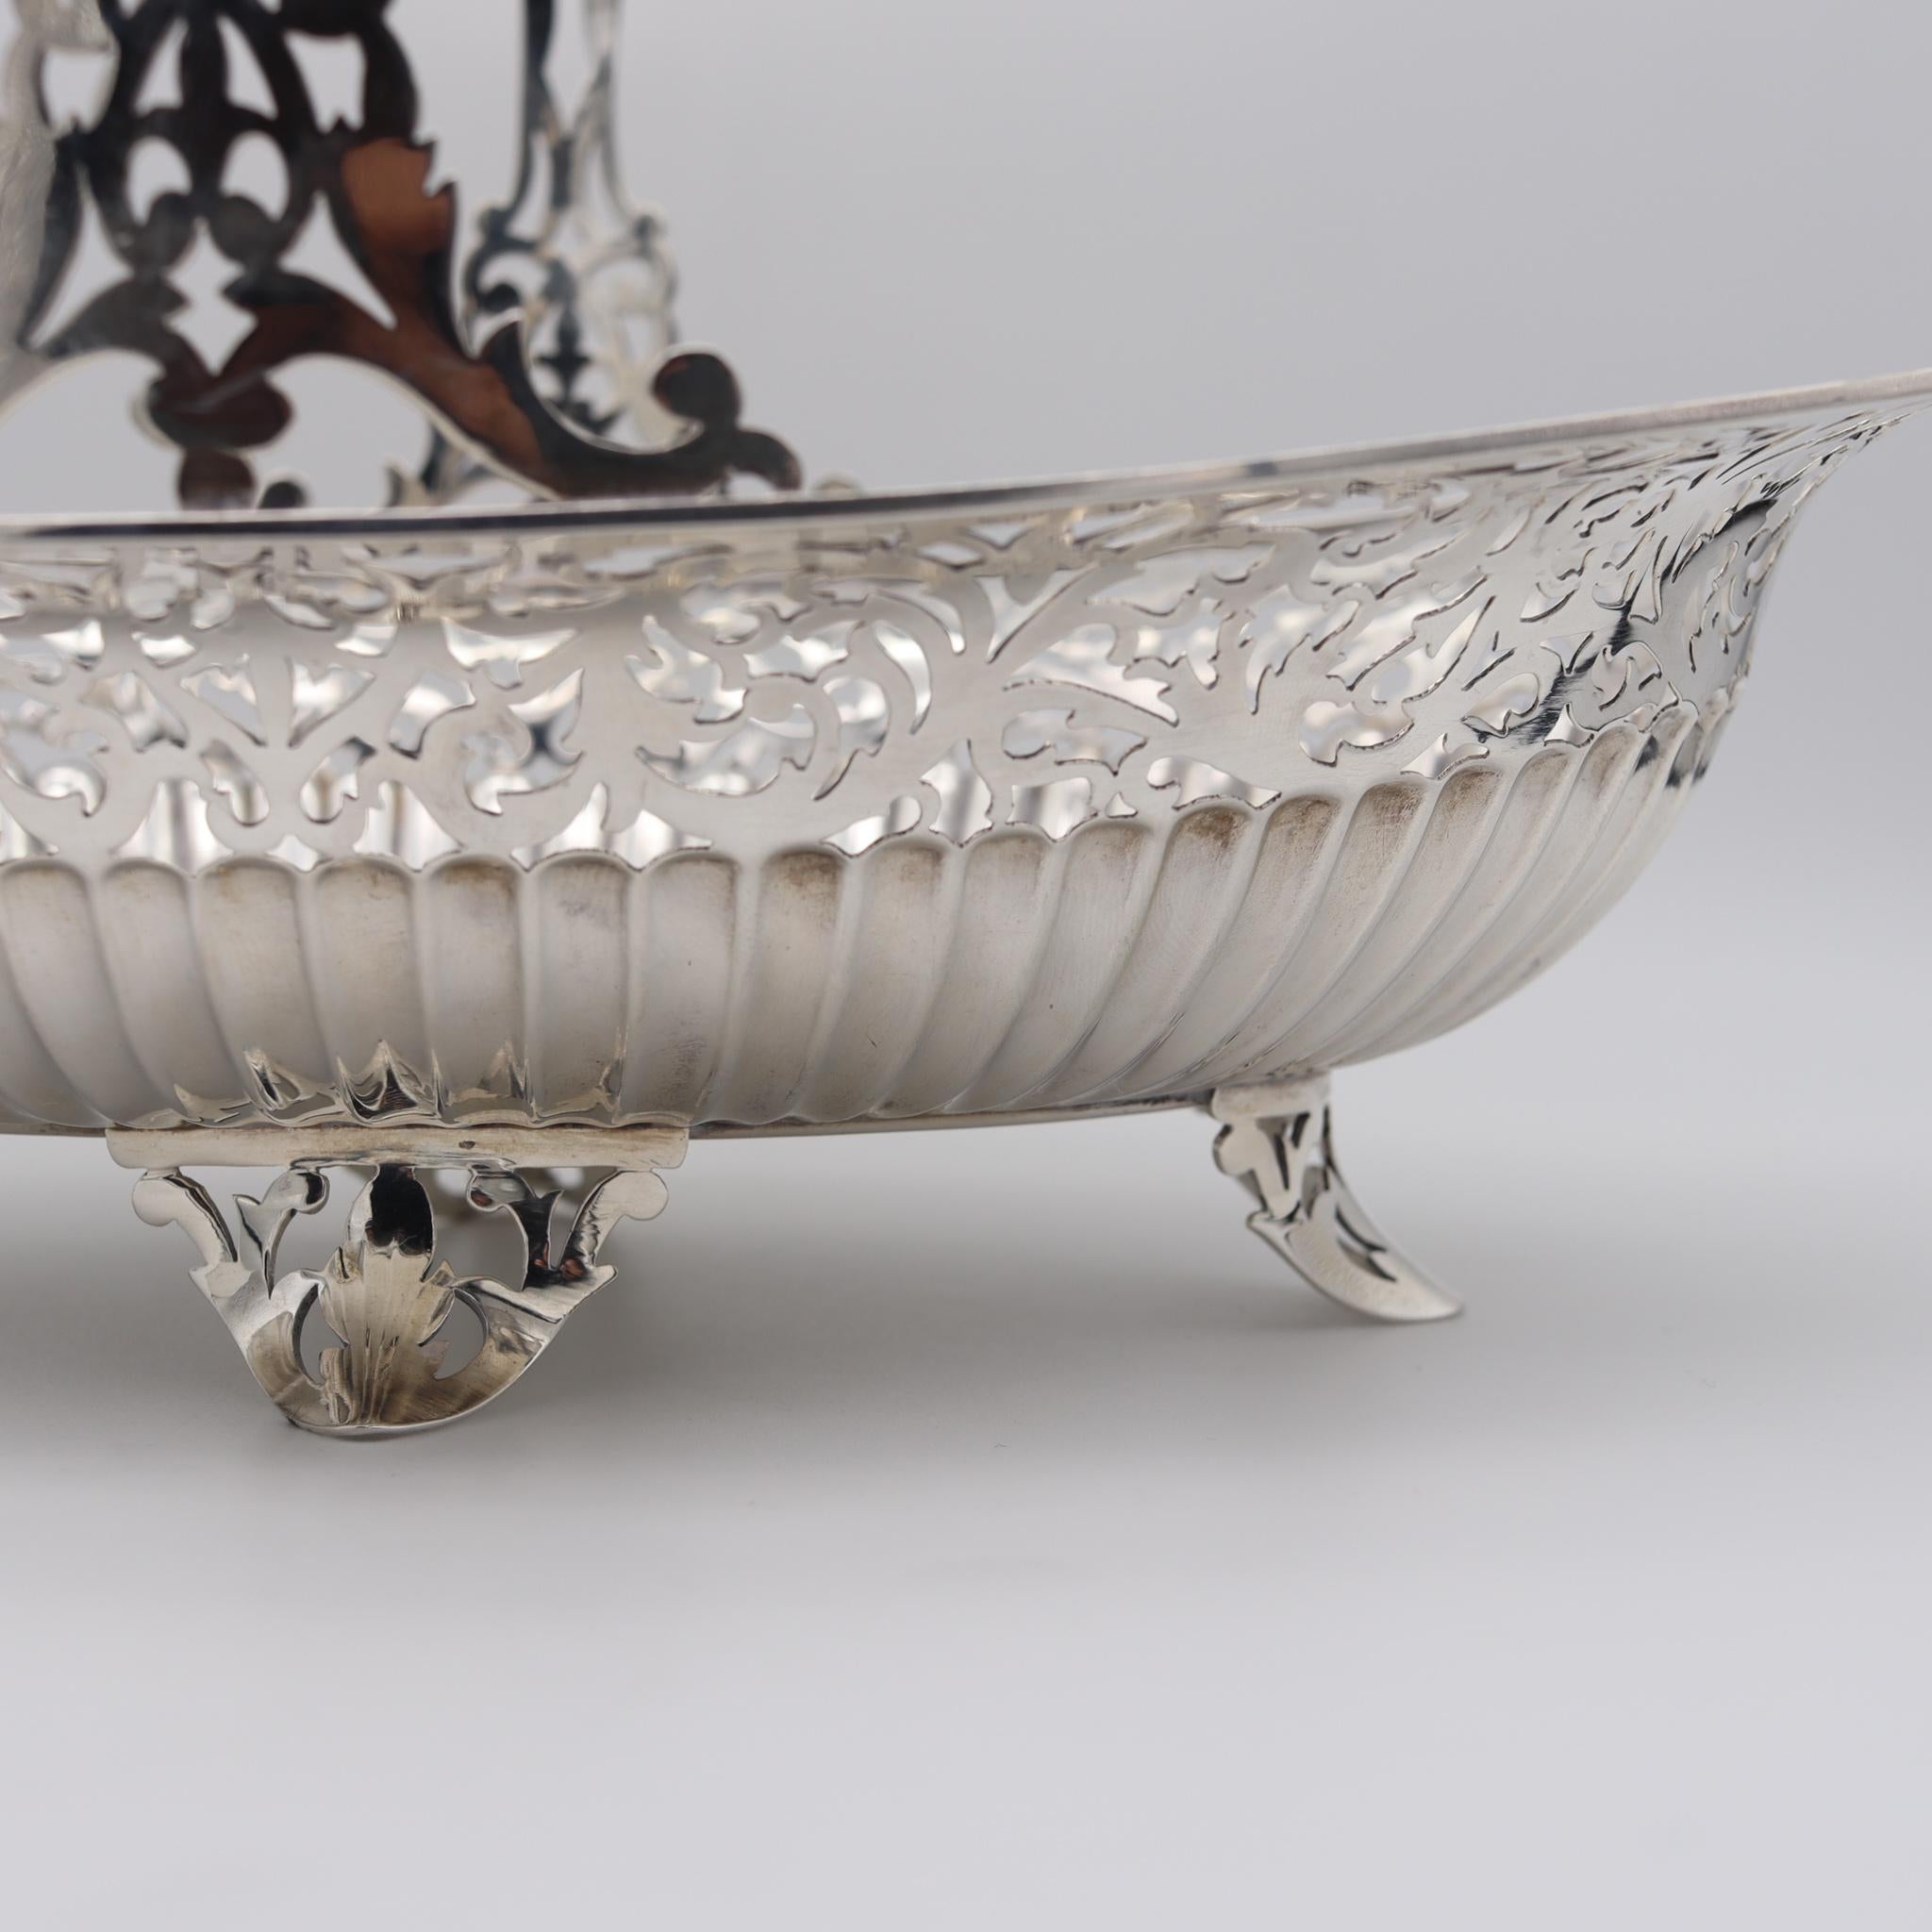 Early 20th Century American 1920 Vintage Navette Sweetmeat Basket with Handle .925 Sterling Silver For Sale